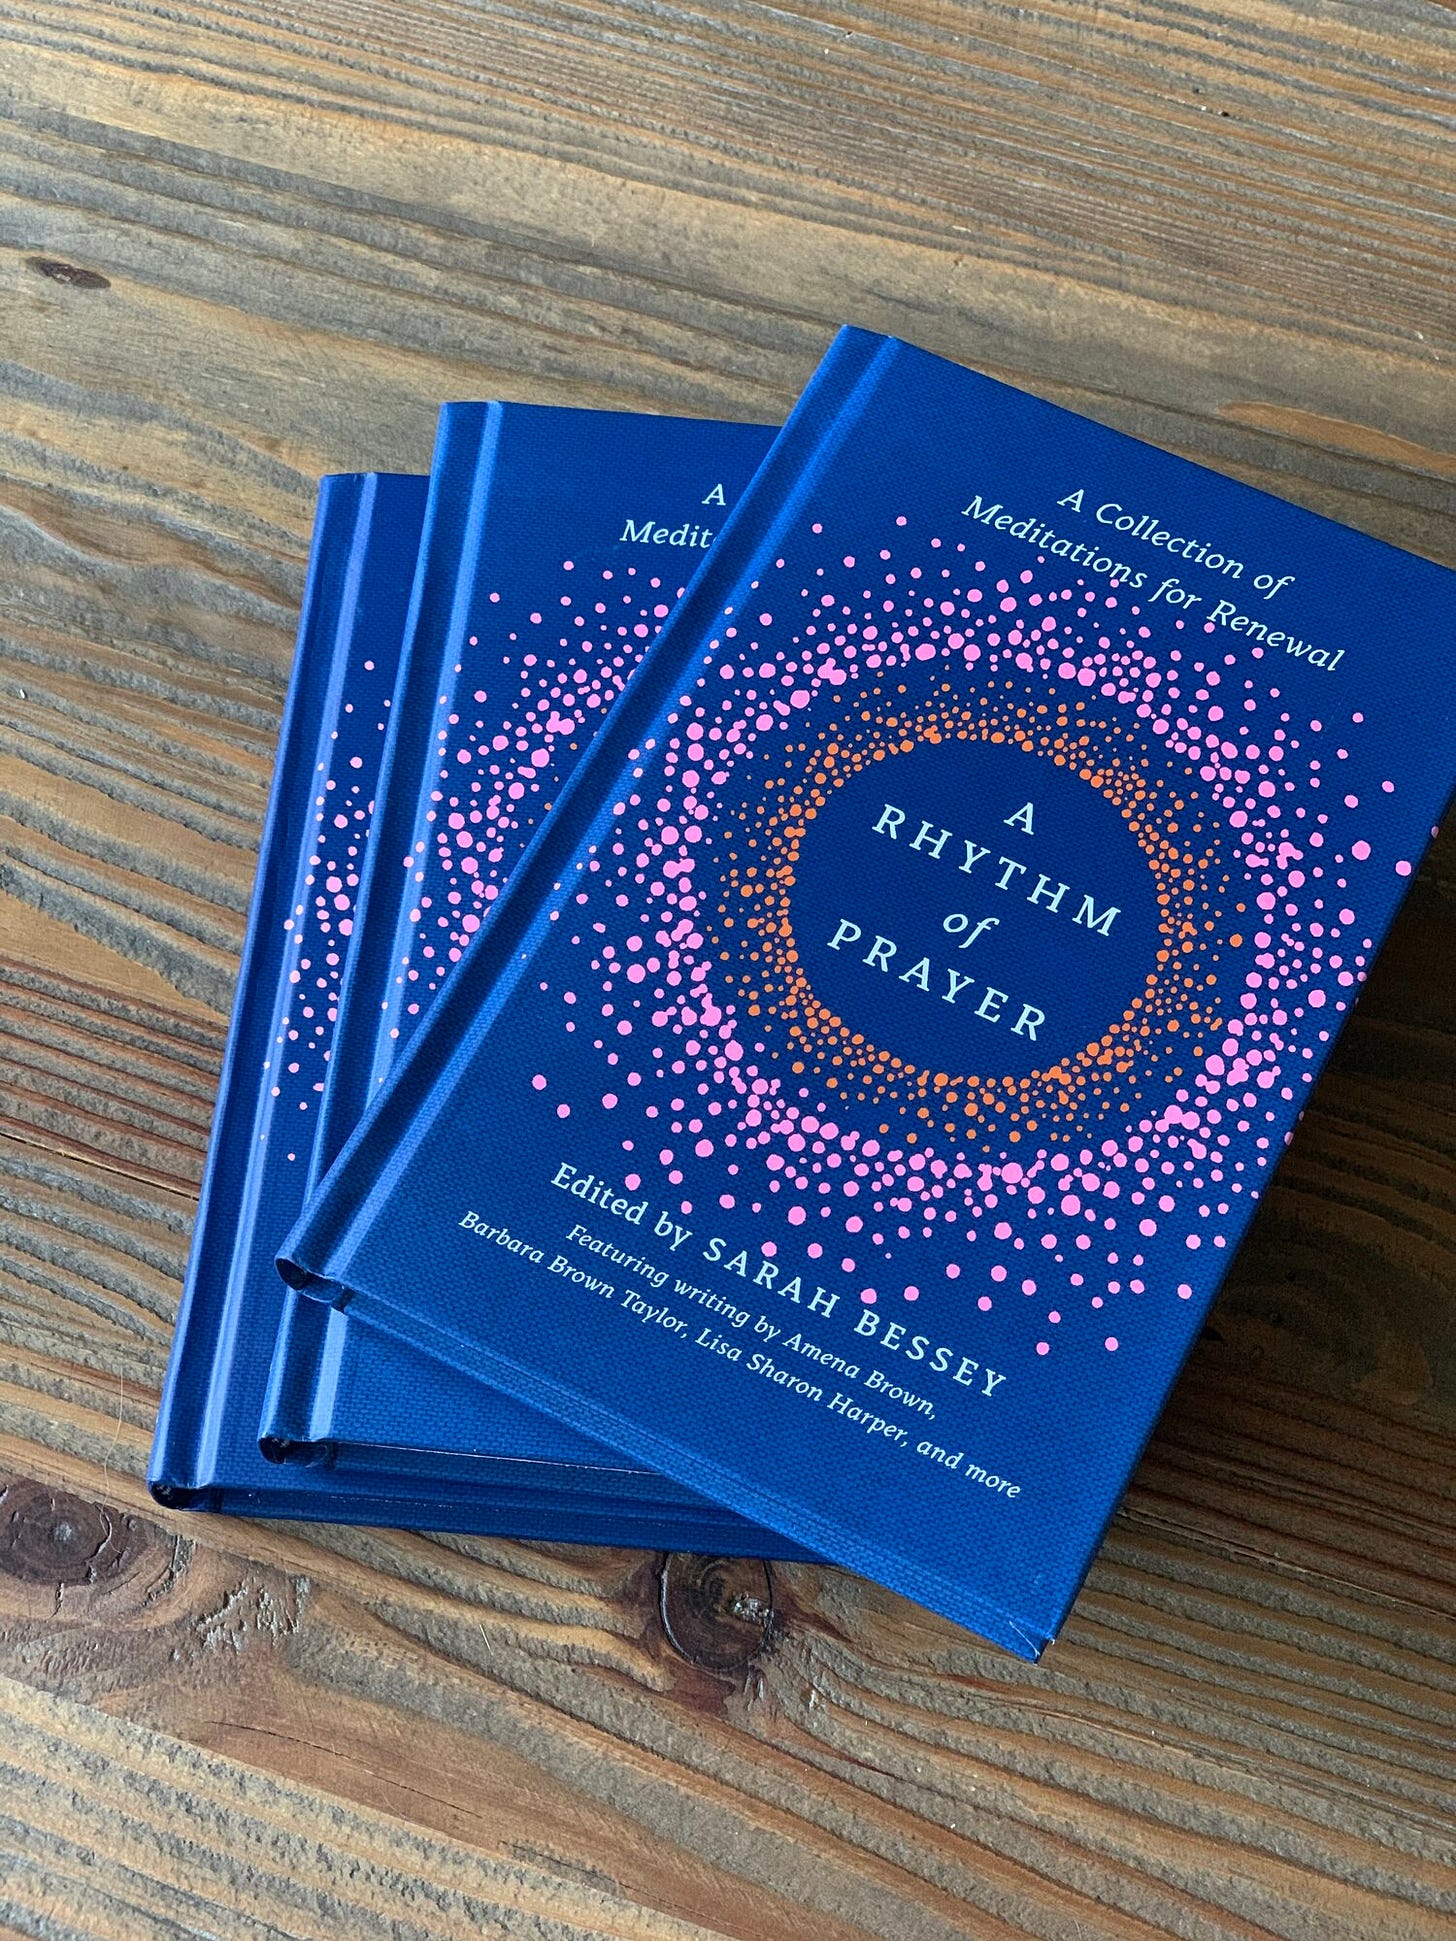 image of the book A Rhythm of Prayer: A Collection of Meditations for Renewal edited by Sarah Bessey